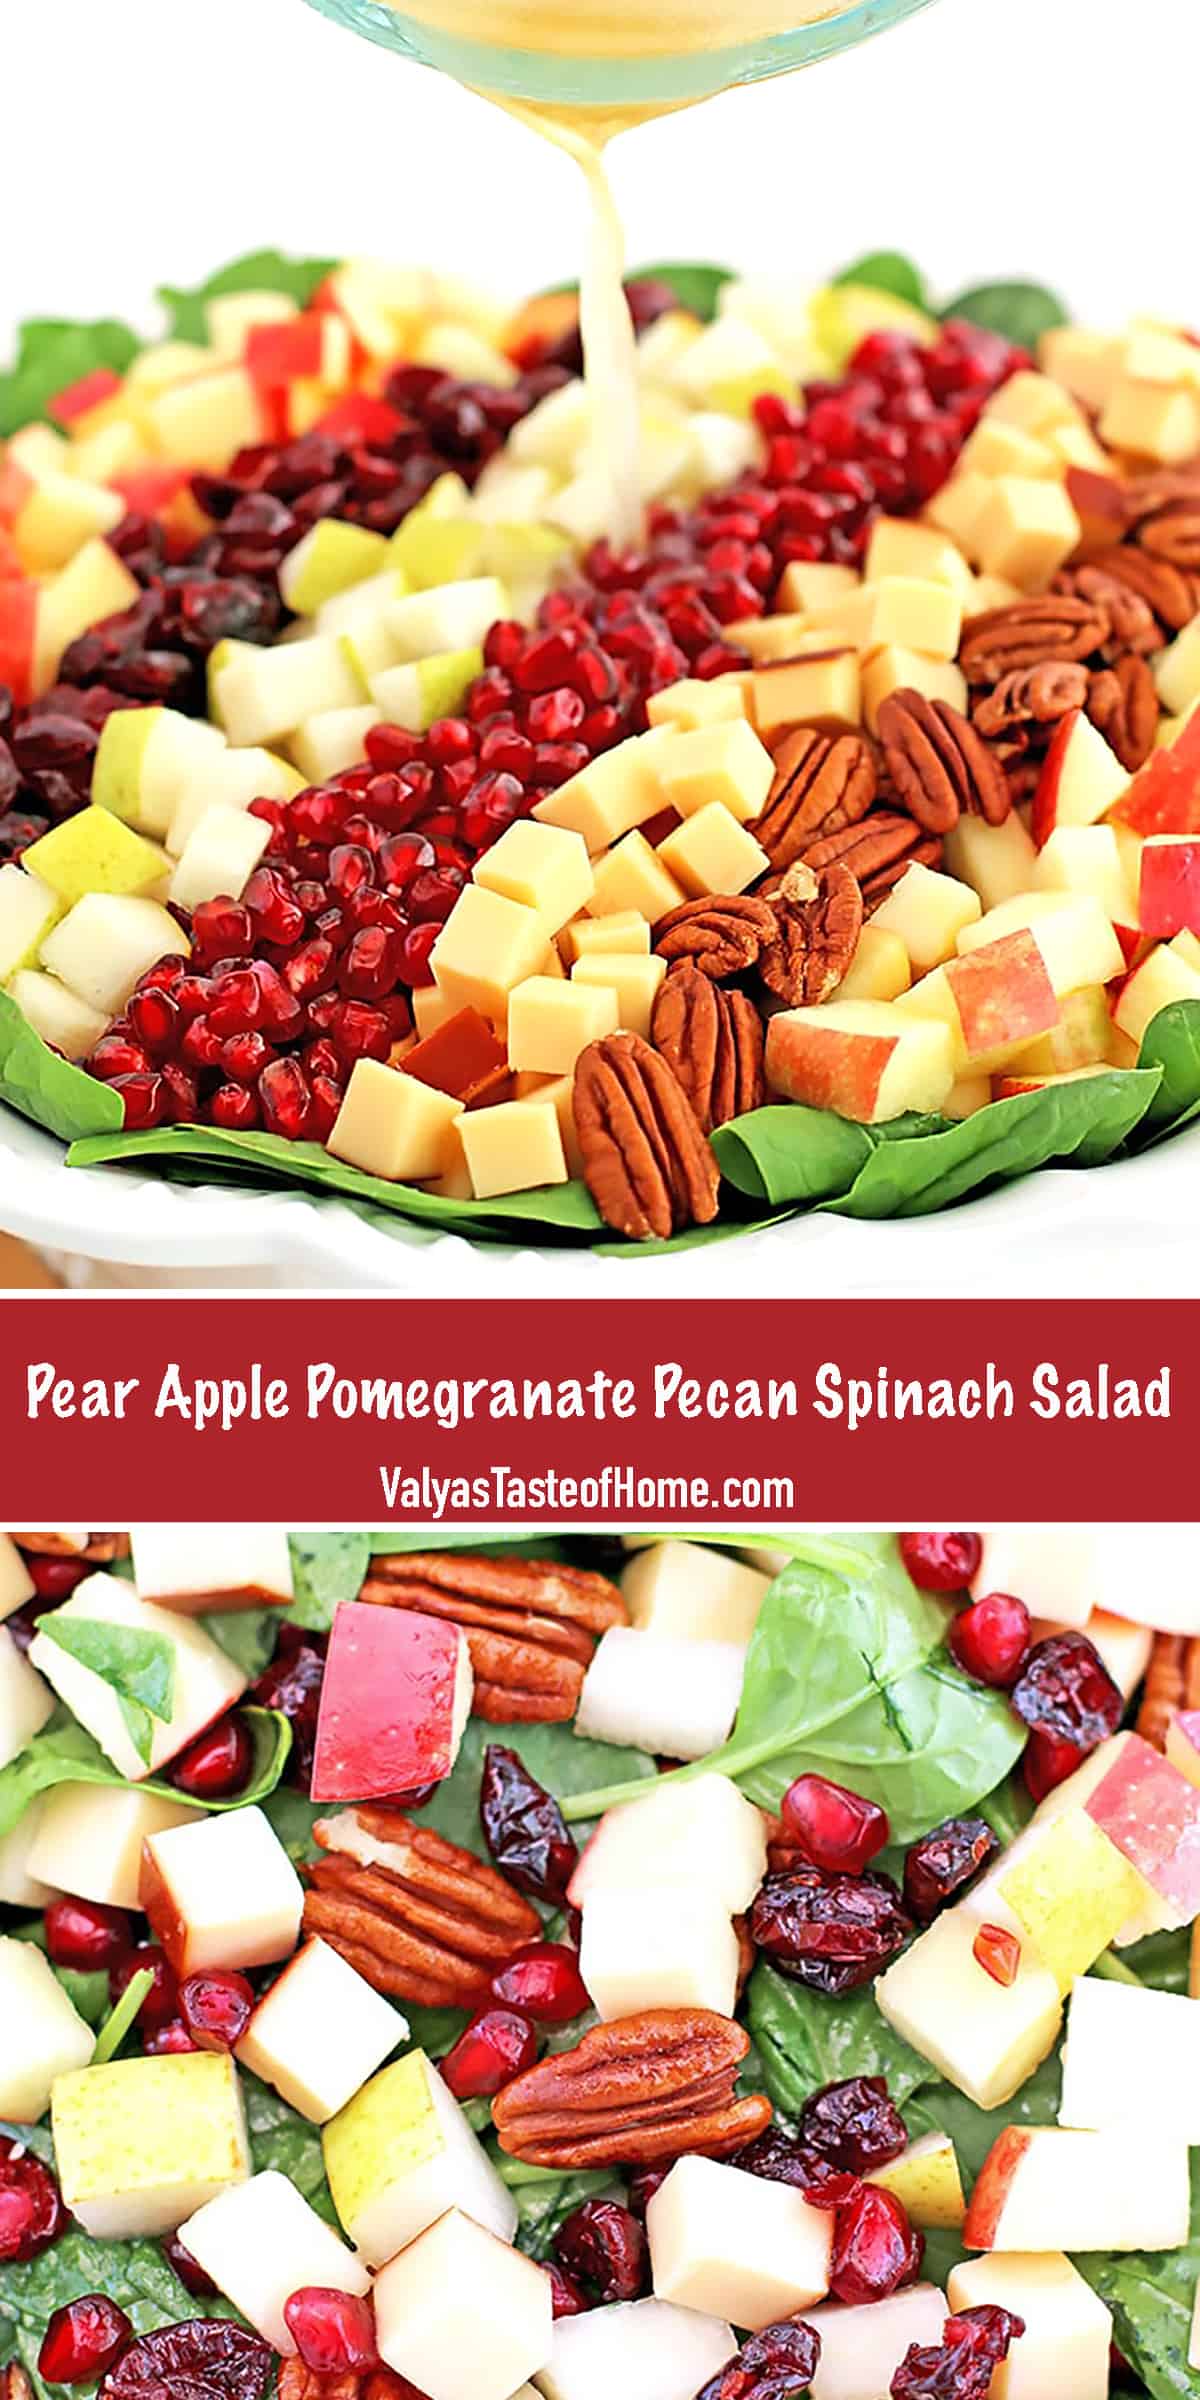 Pear Apple Pomegranate Salad What is there not to love about fresh and beautiful salad? This Pear Apple Pomegranate Pecan Spinach Salad Recipe is super easy to make and is such an attractive addition to your table.